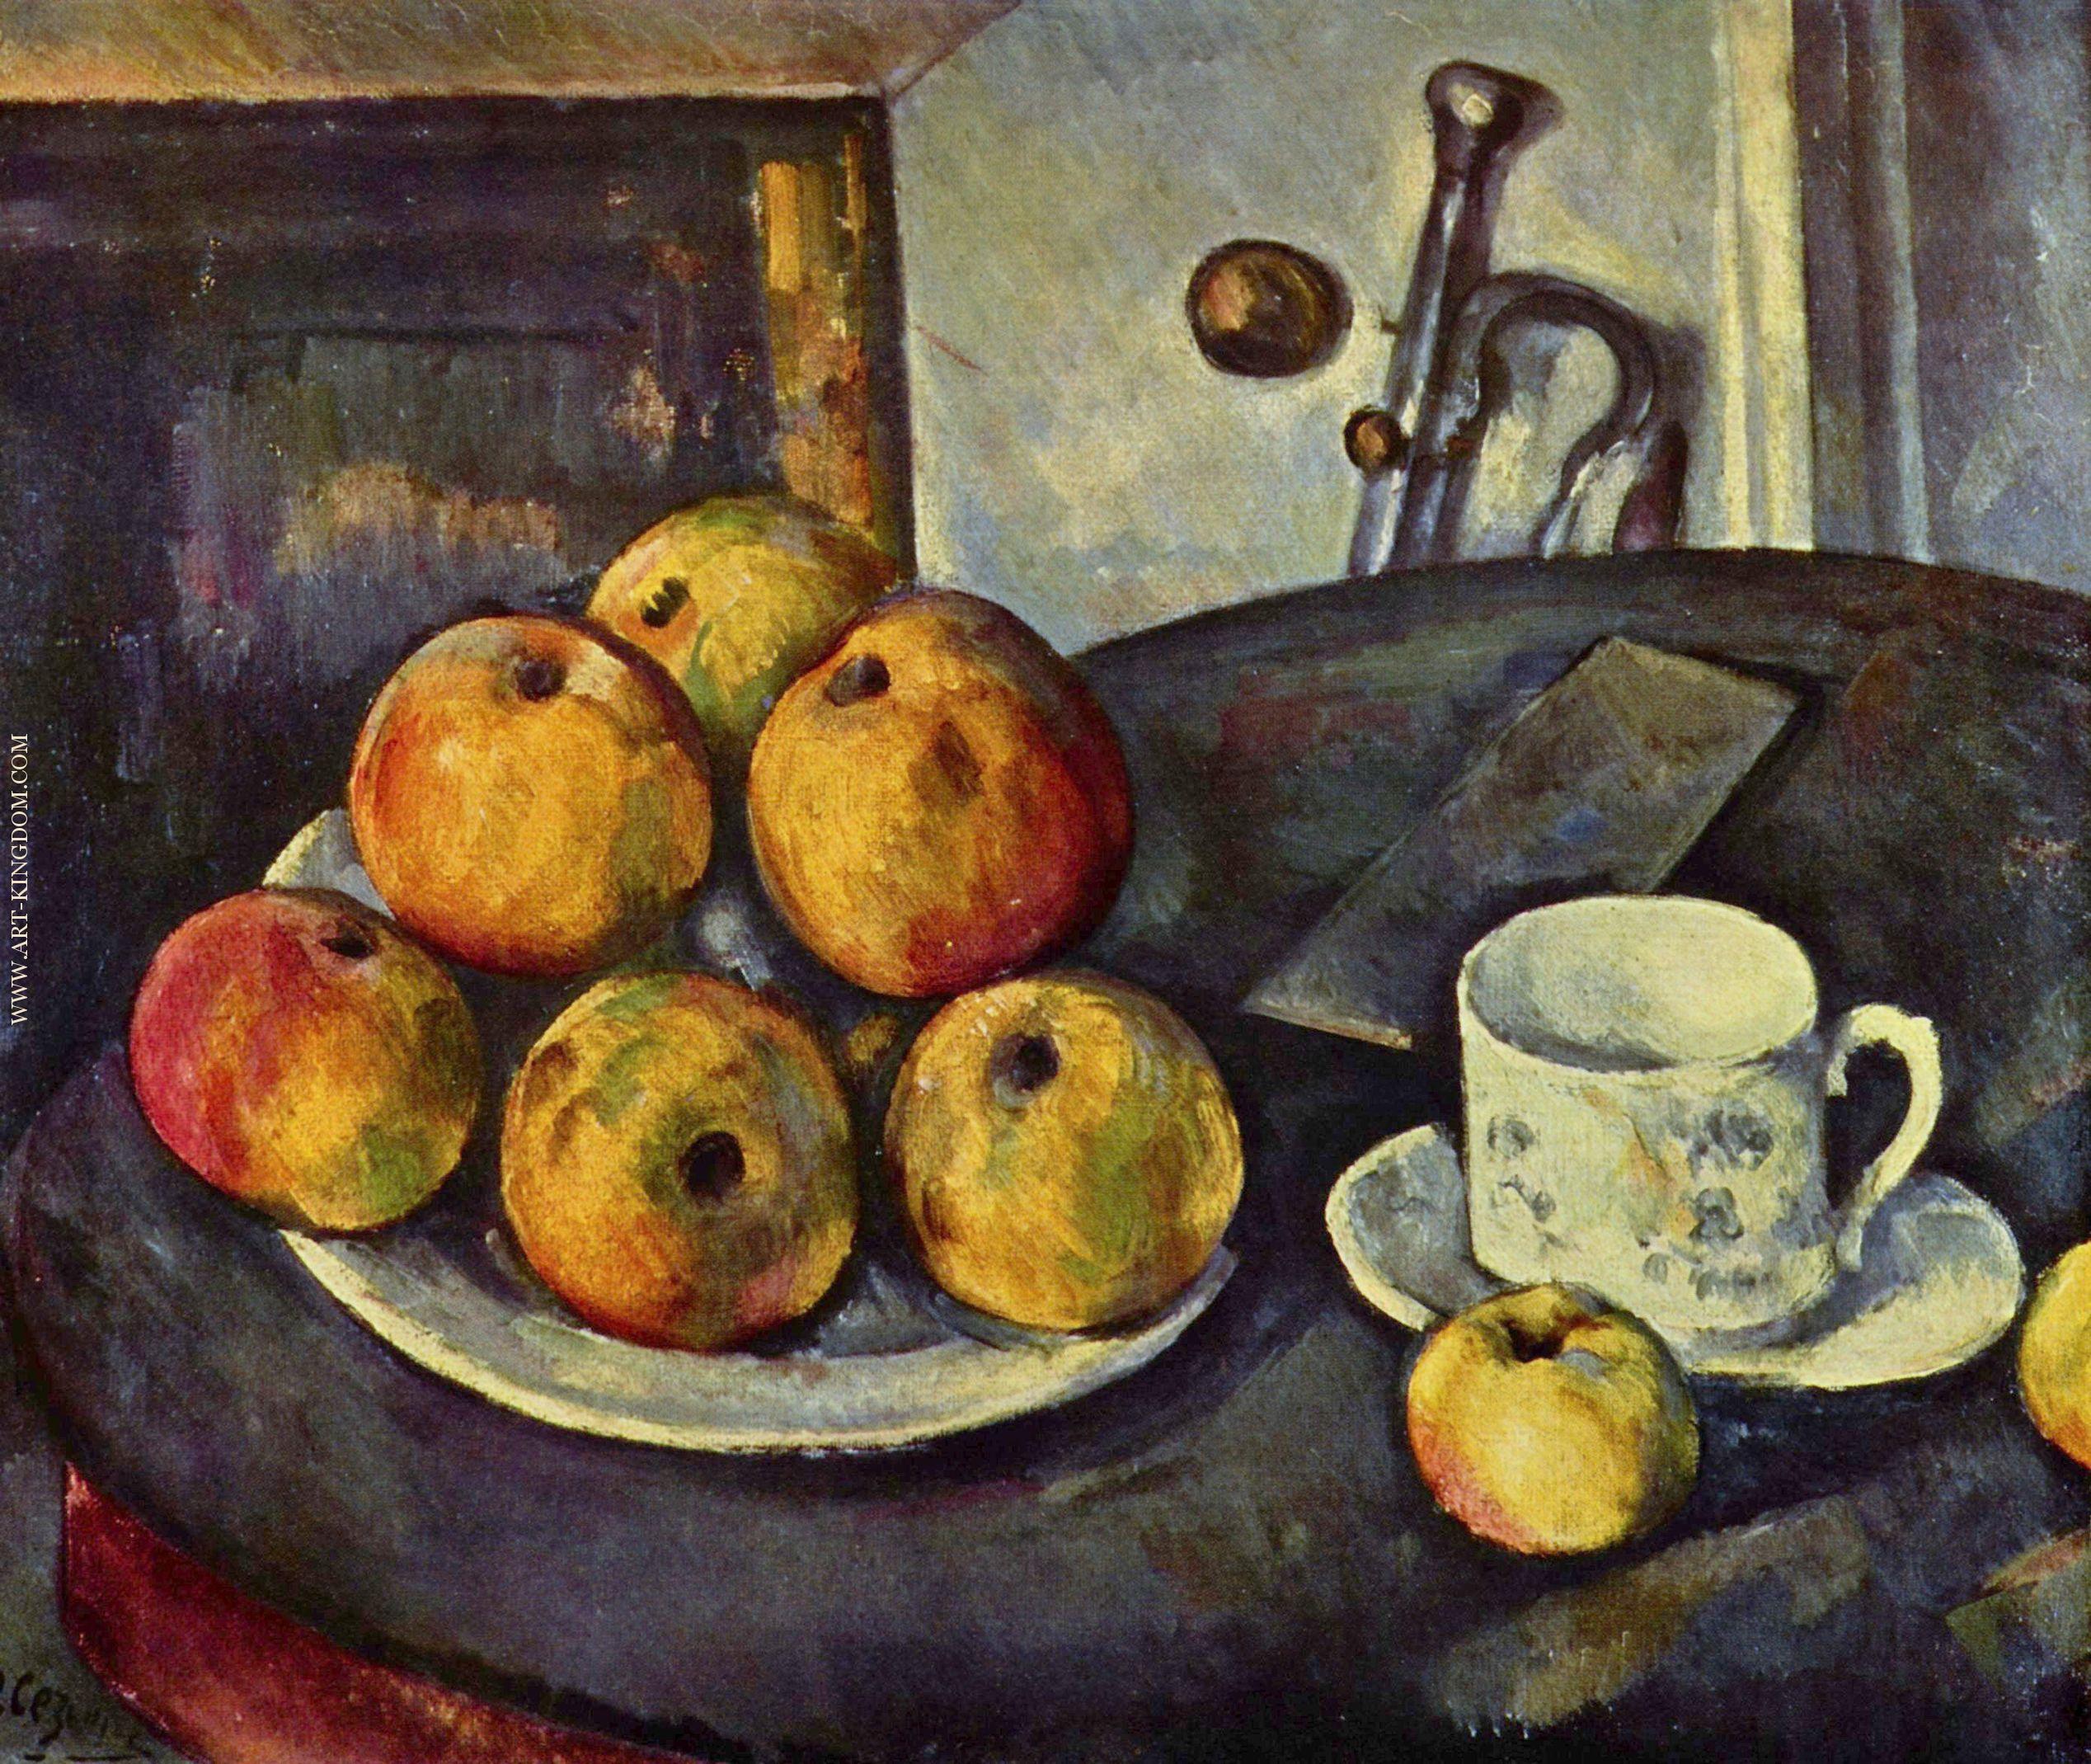 Still Life with Apples 3